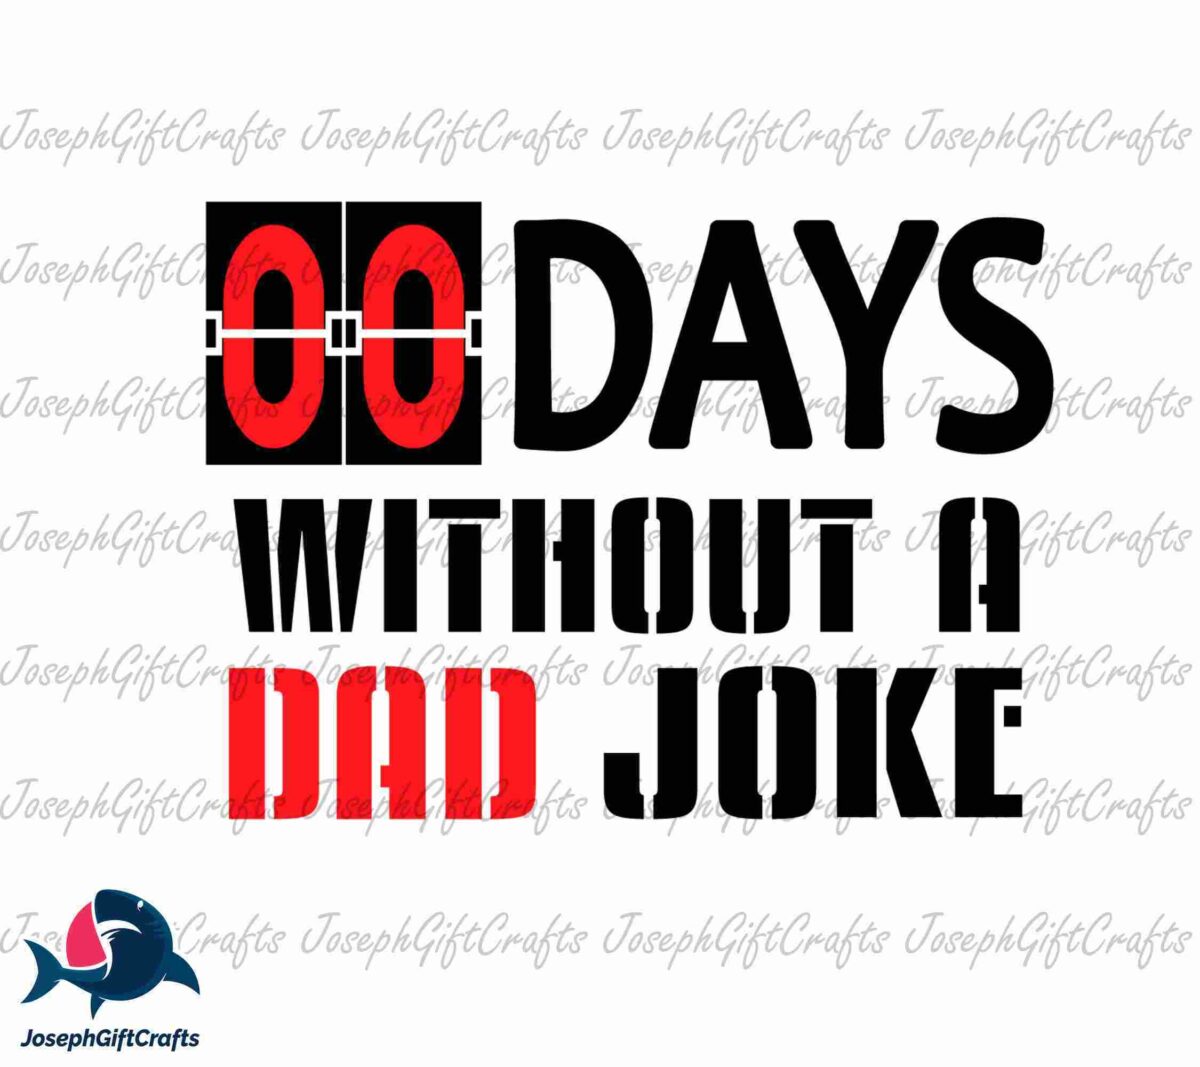 Sign reading "00 Days Without a Dad Joke" with the zeros resembling a digital counter. The text is in black and red and has a watermark in the background.